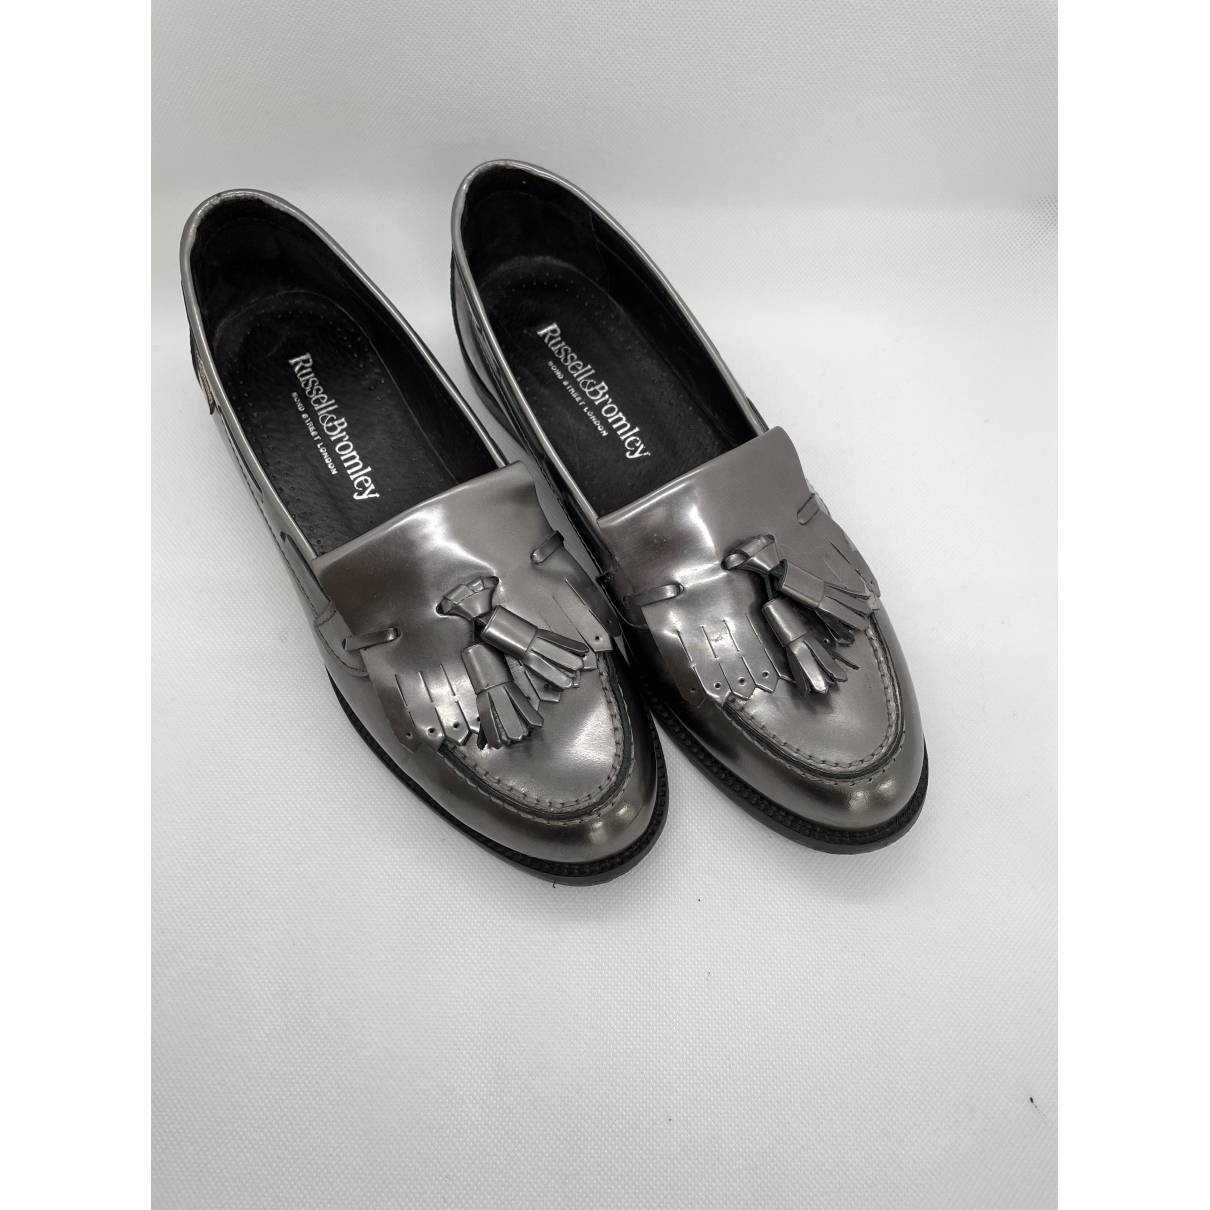 Buy Russell & Bromley Patent leather flats online